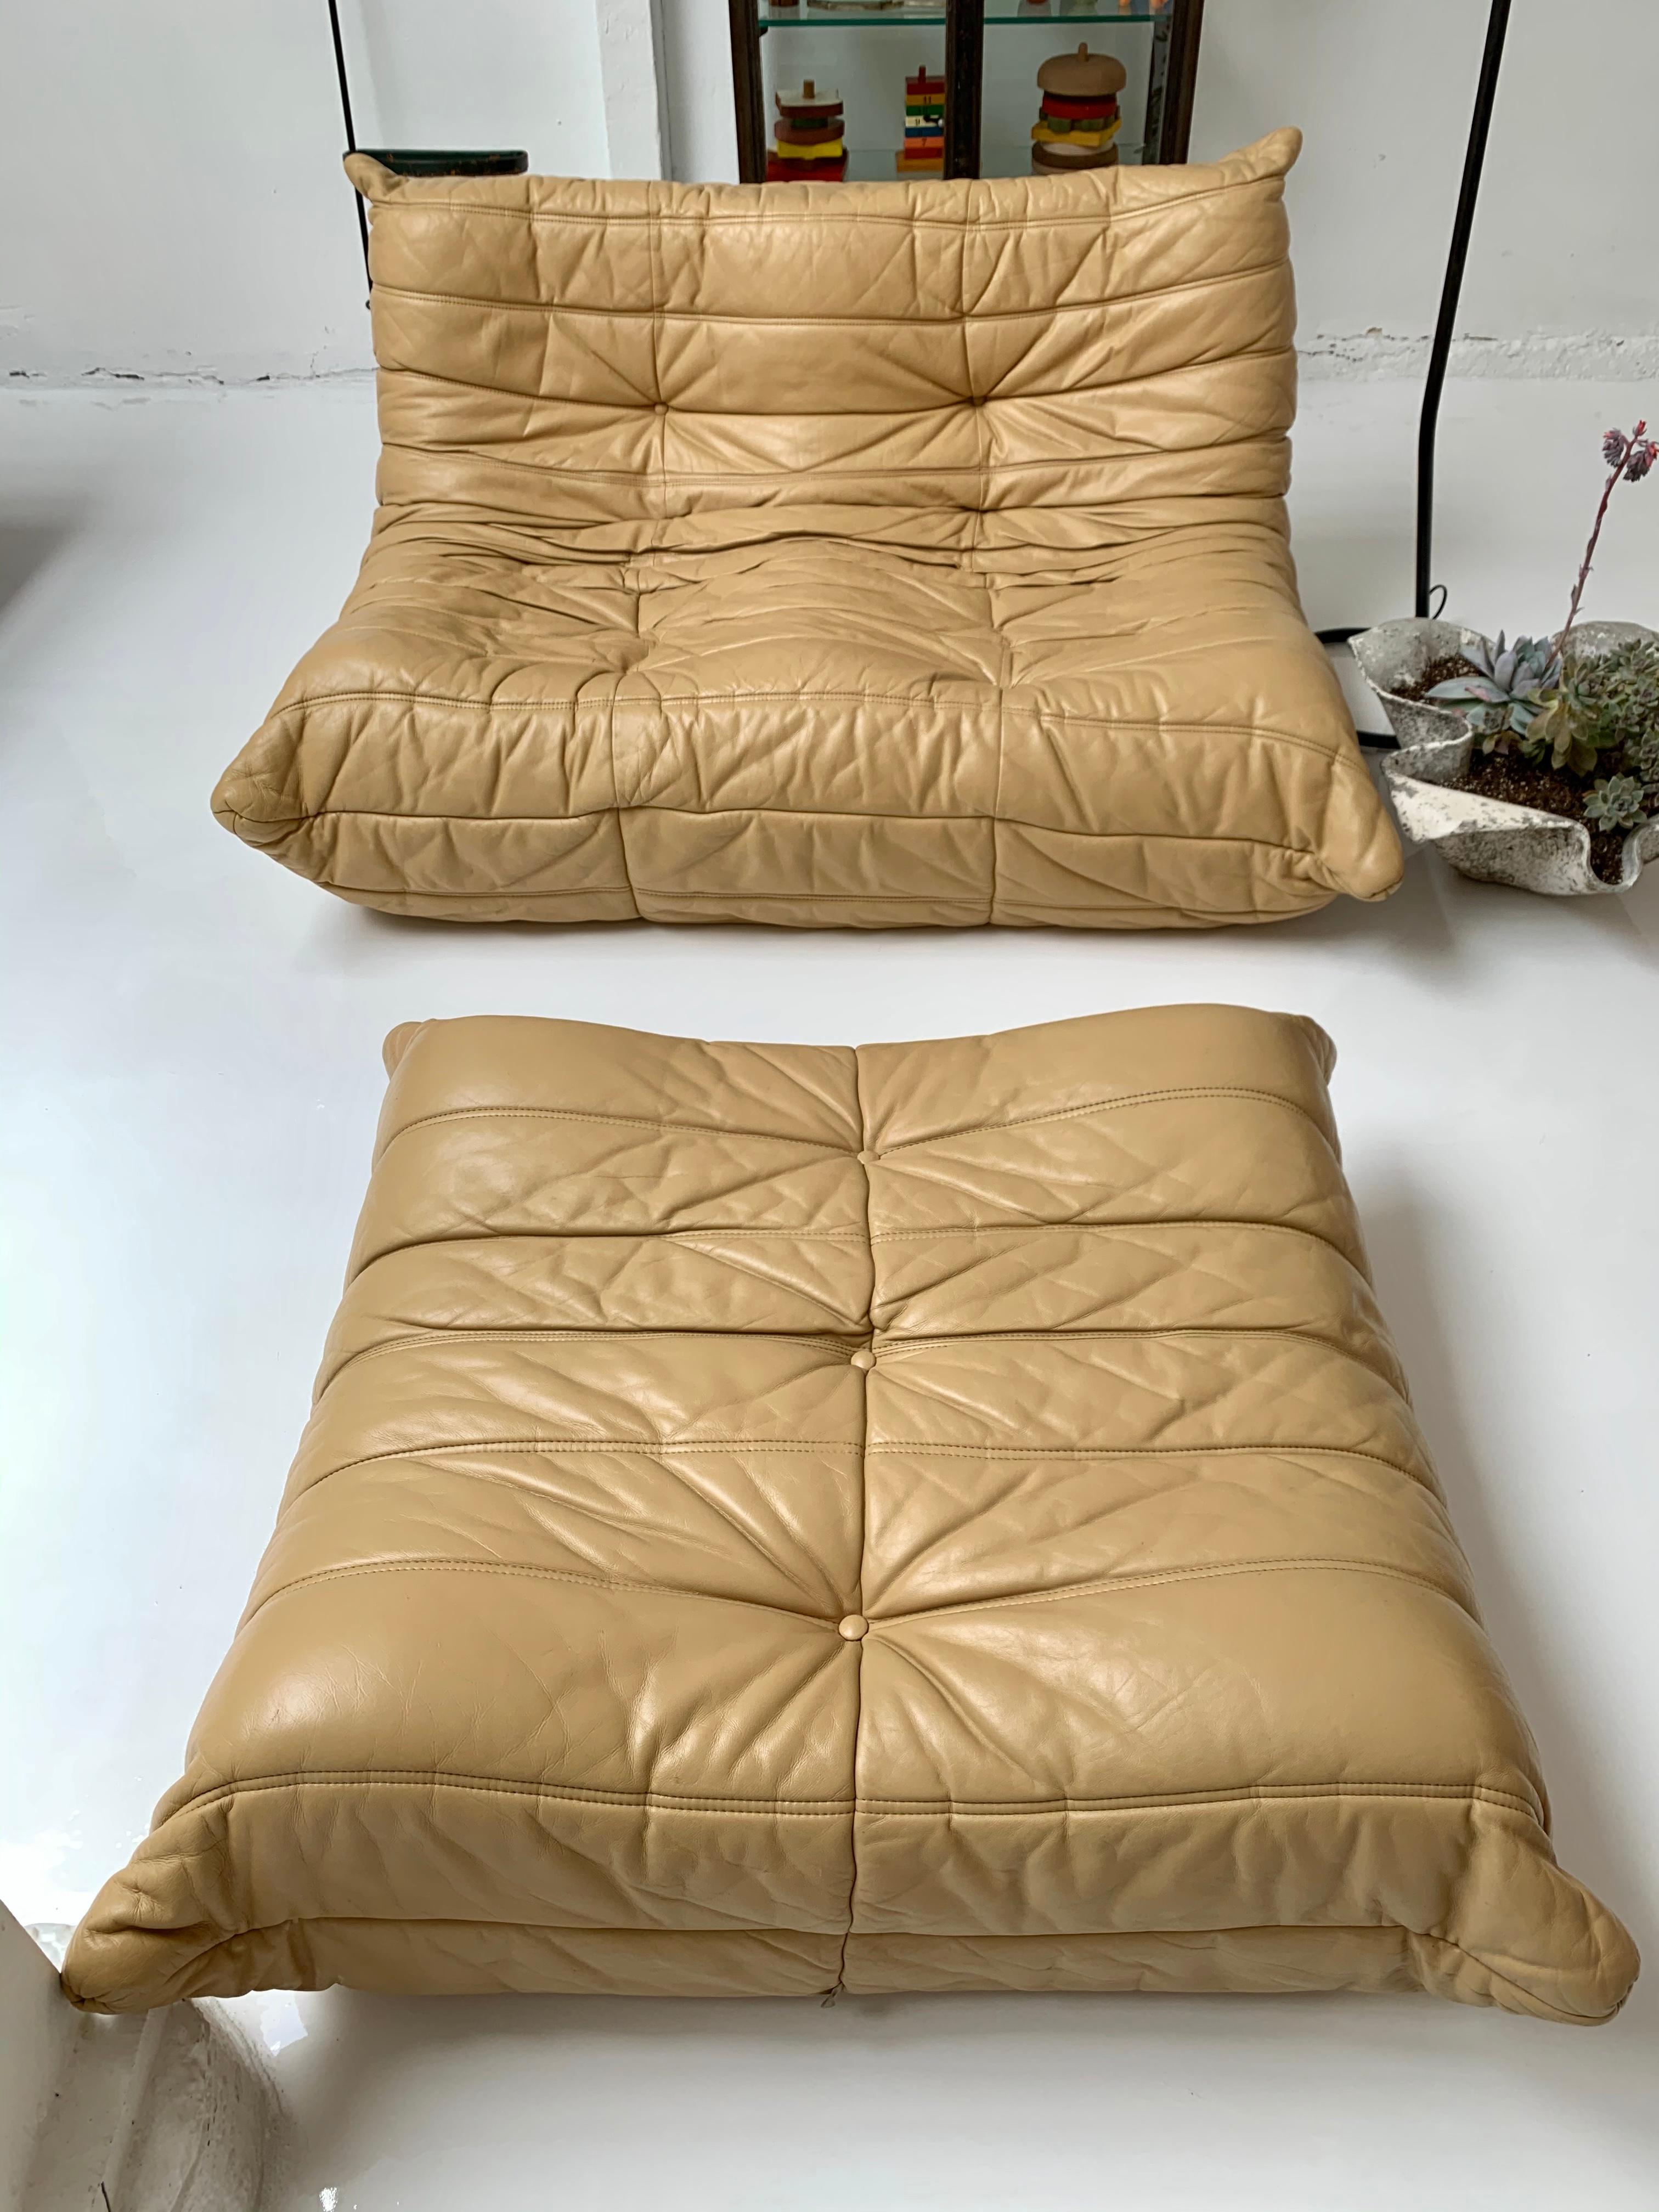 Rare vintage leather Togo loveseat sofa by Michael Ducaroy for Ligne Roset. Original leather in very rare color. Terribly comfortable. Labels still attached. Chair is in very good condition with excellent patina. Professionally cleaned and color